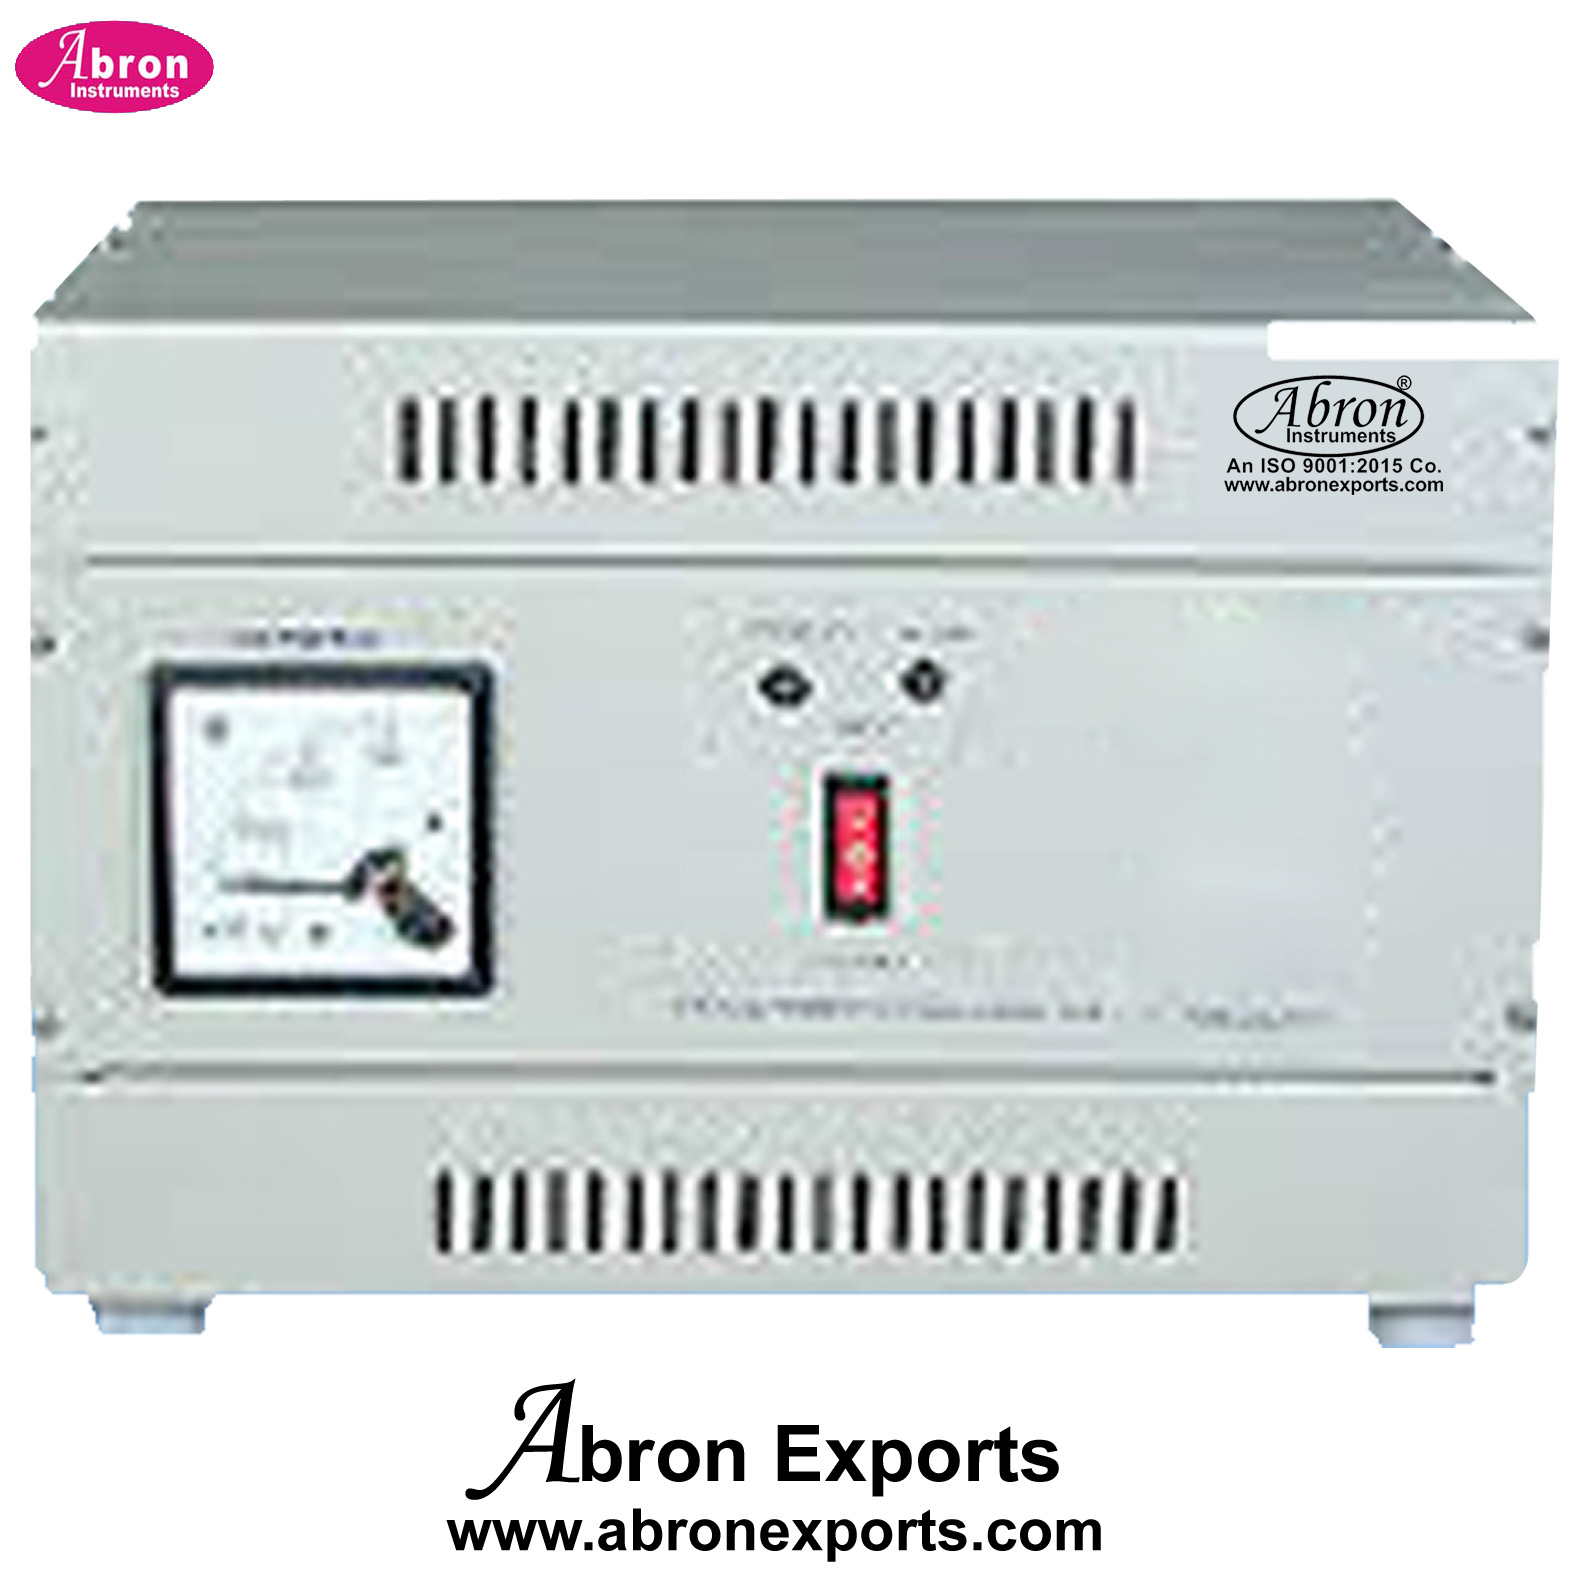 Voltage Stabilizer Manual with Dial Meter 1.5 Ton AC Manual Input 170-250v AC output 220V +10% with connector AE-1396M3